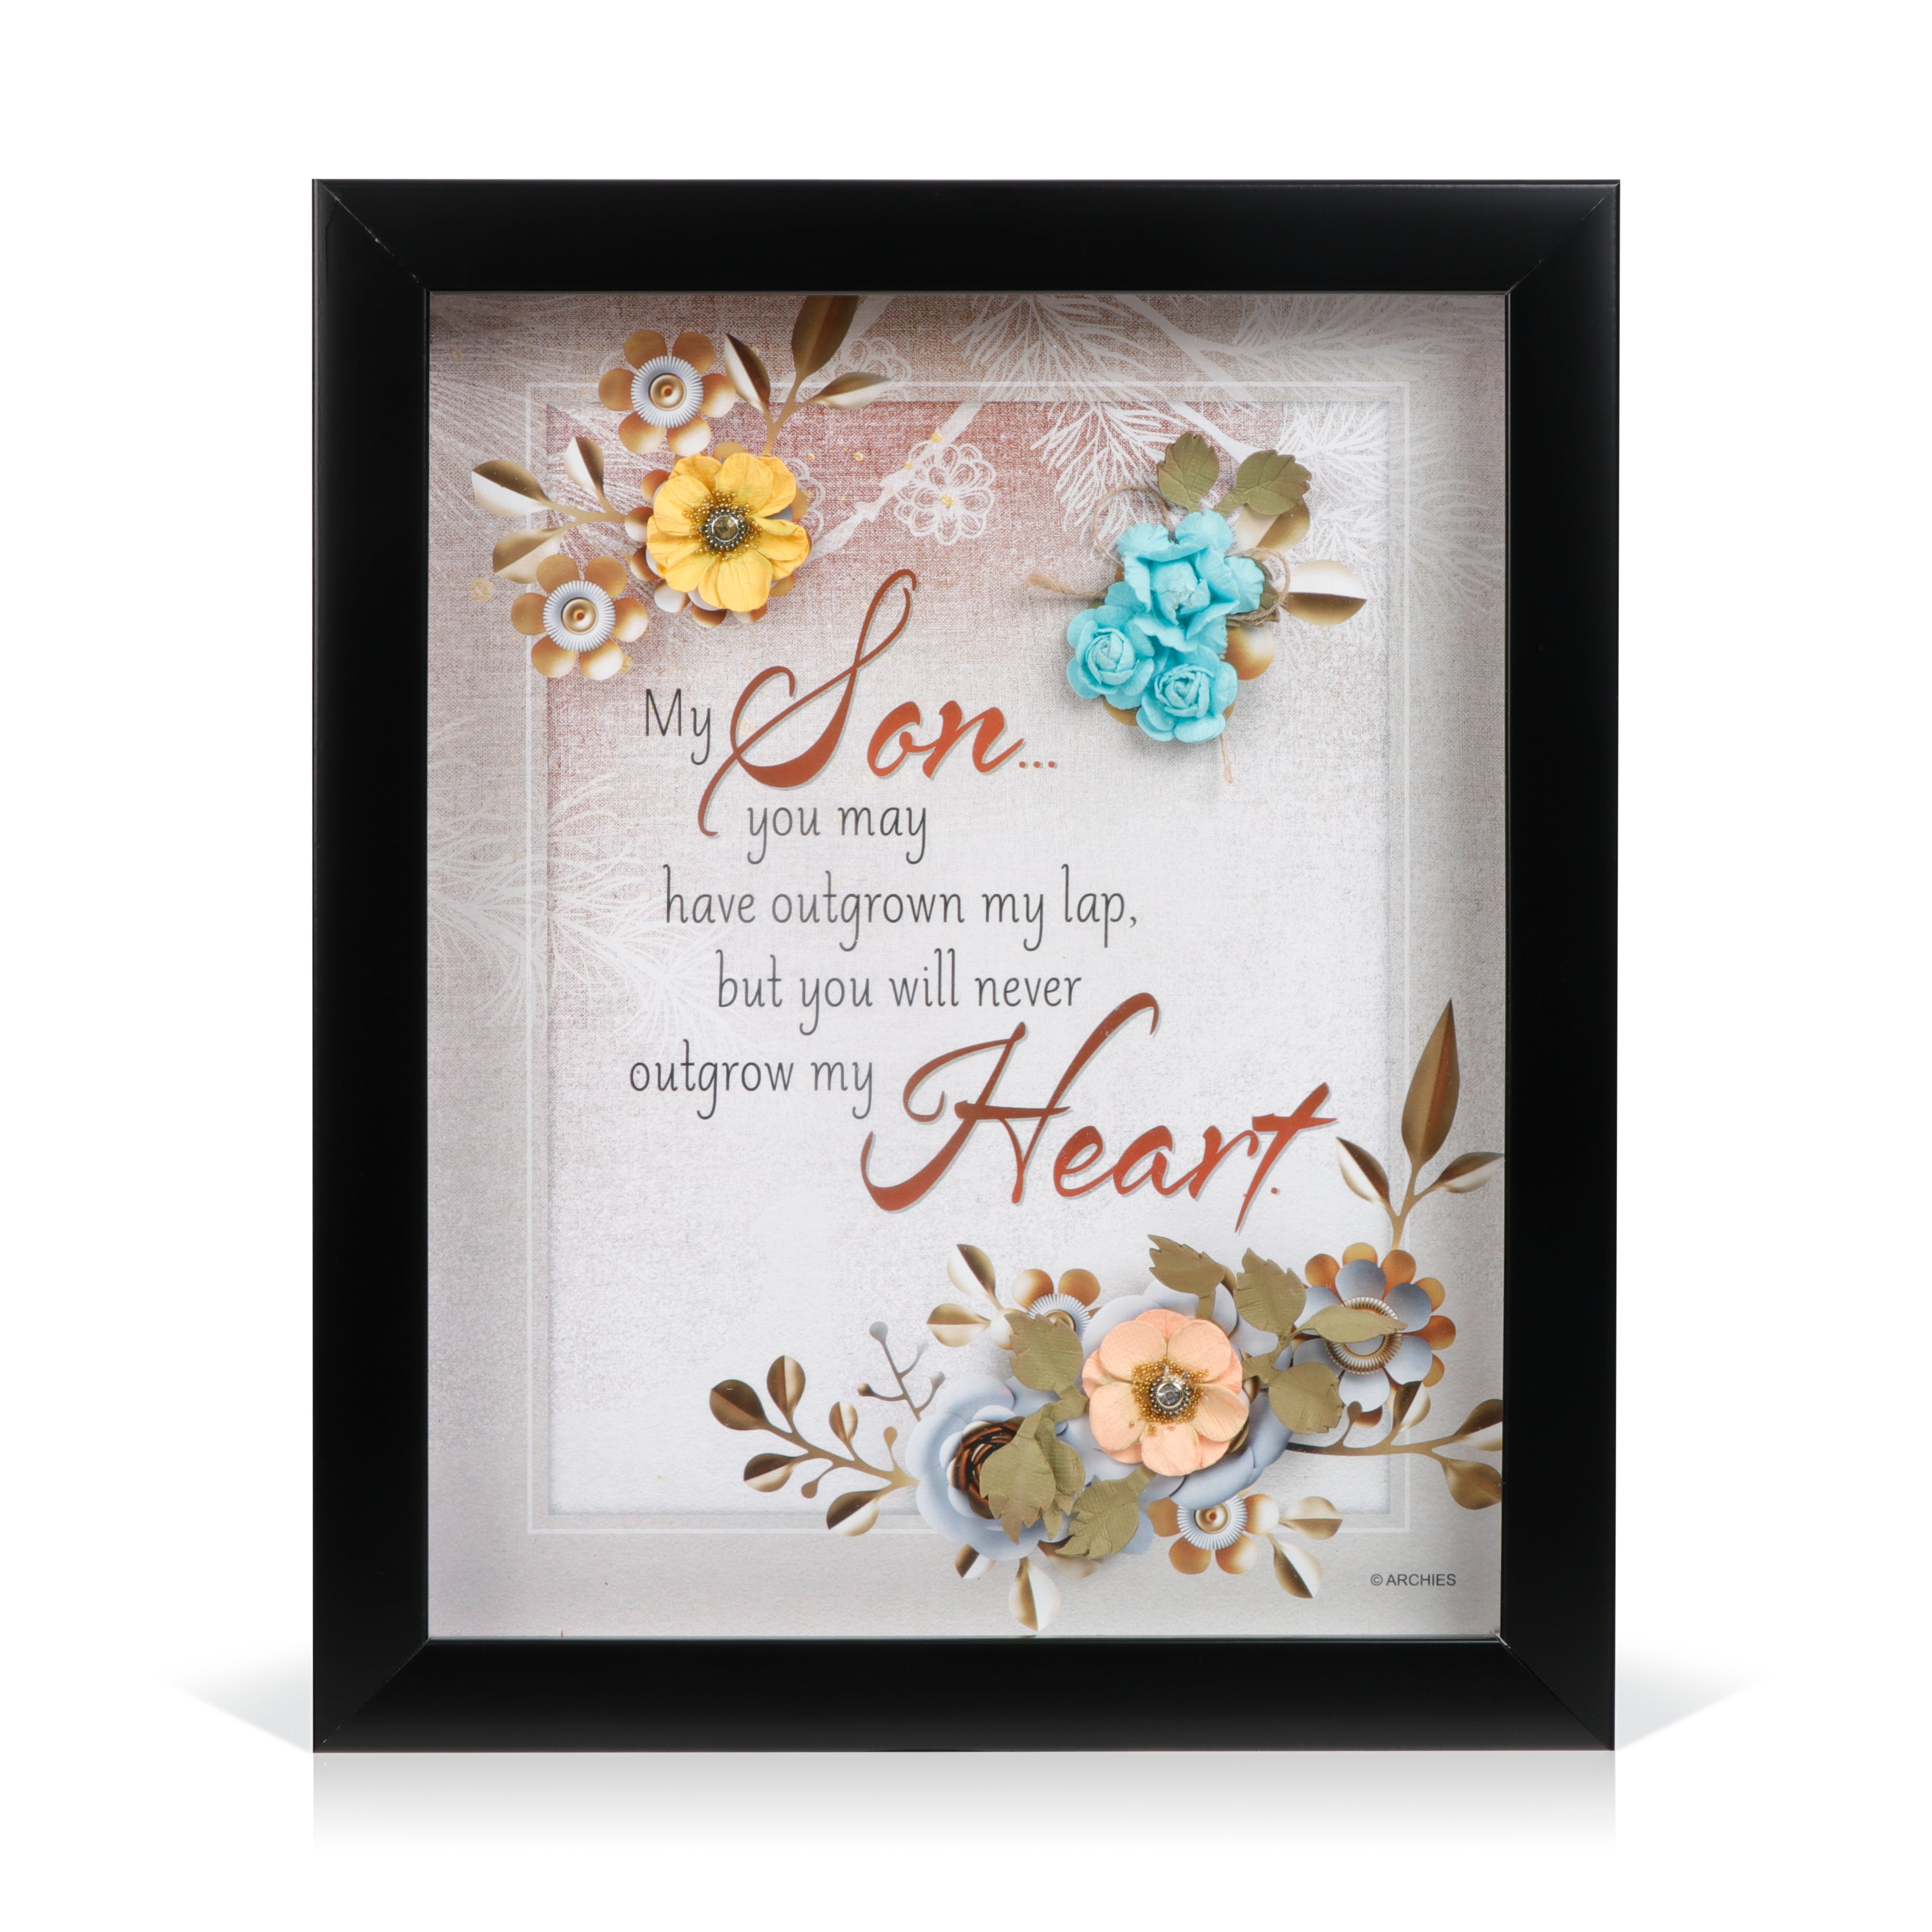 Archies | Archies KEEPSAKE QUOTATION - MY SON YOU MAY.... For gifting and Home décor 0